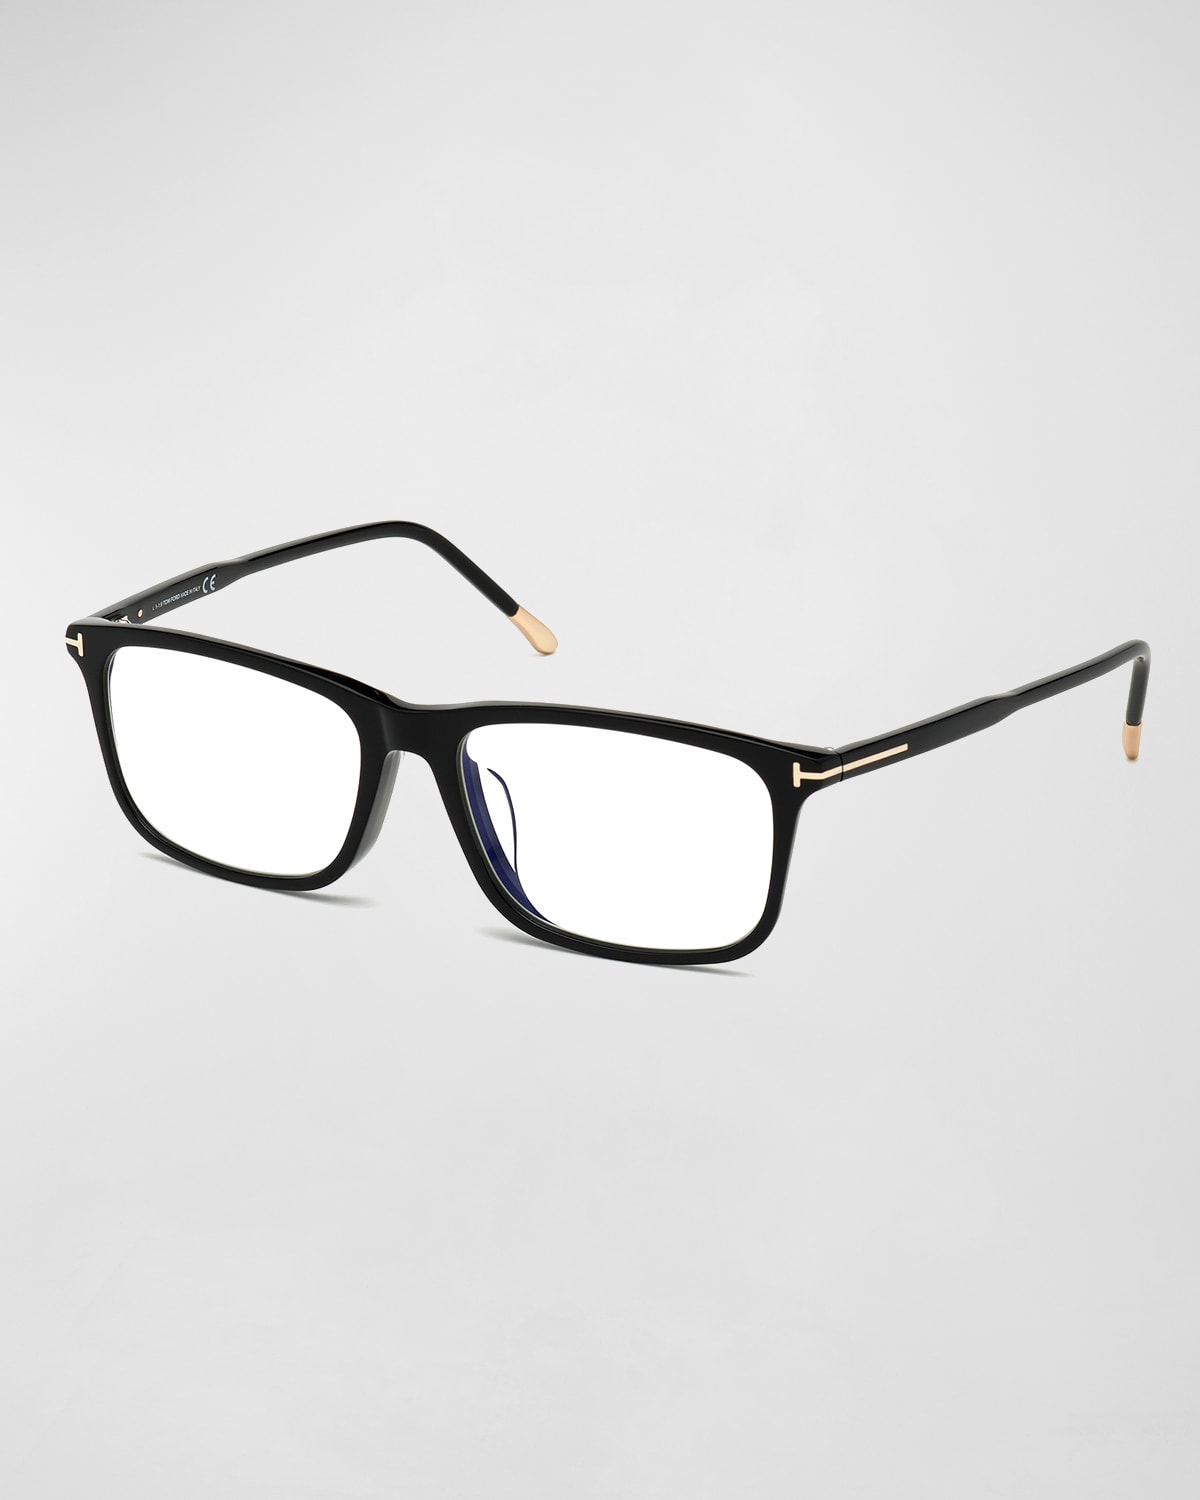 Tom Ford Clear Frames | Neiman Marcus